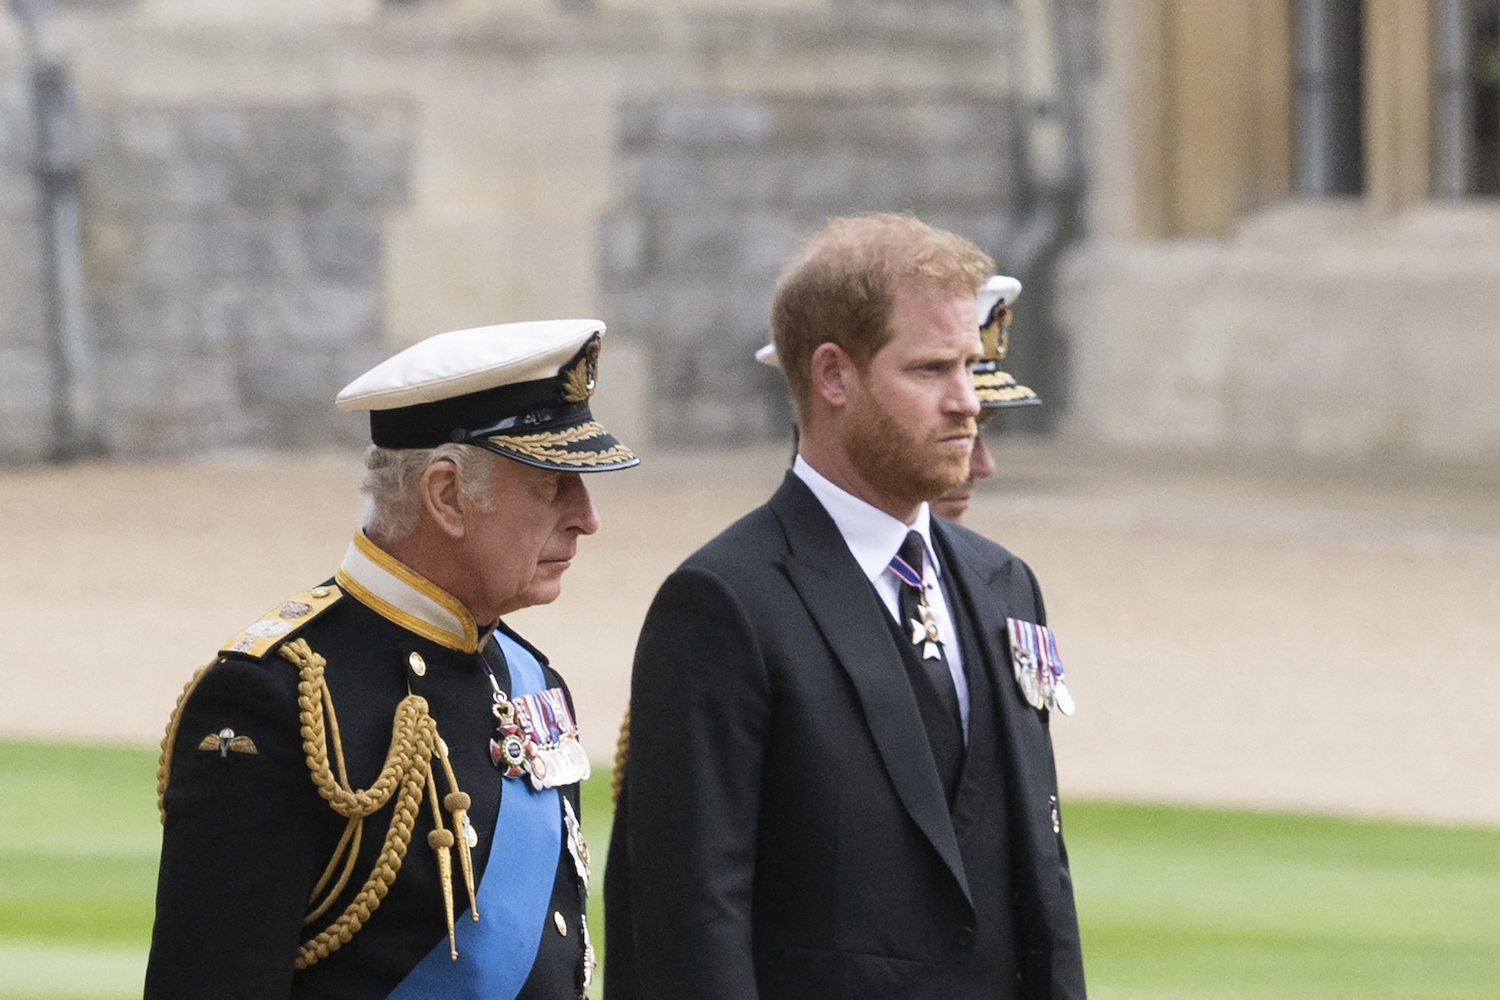 Body Language Expert Says Prince Harry Displayed Subtle Stress Release Gesture Following Queen’s Emotional Funeral